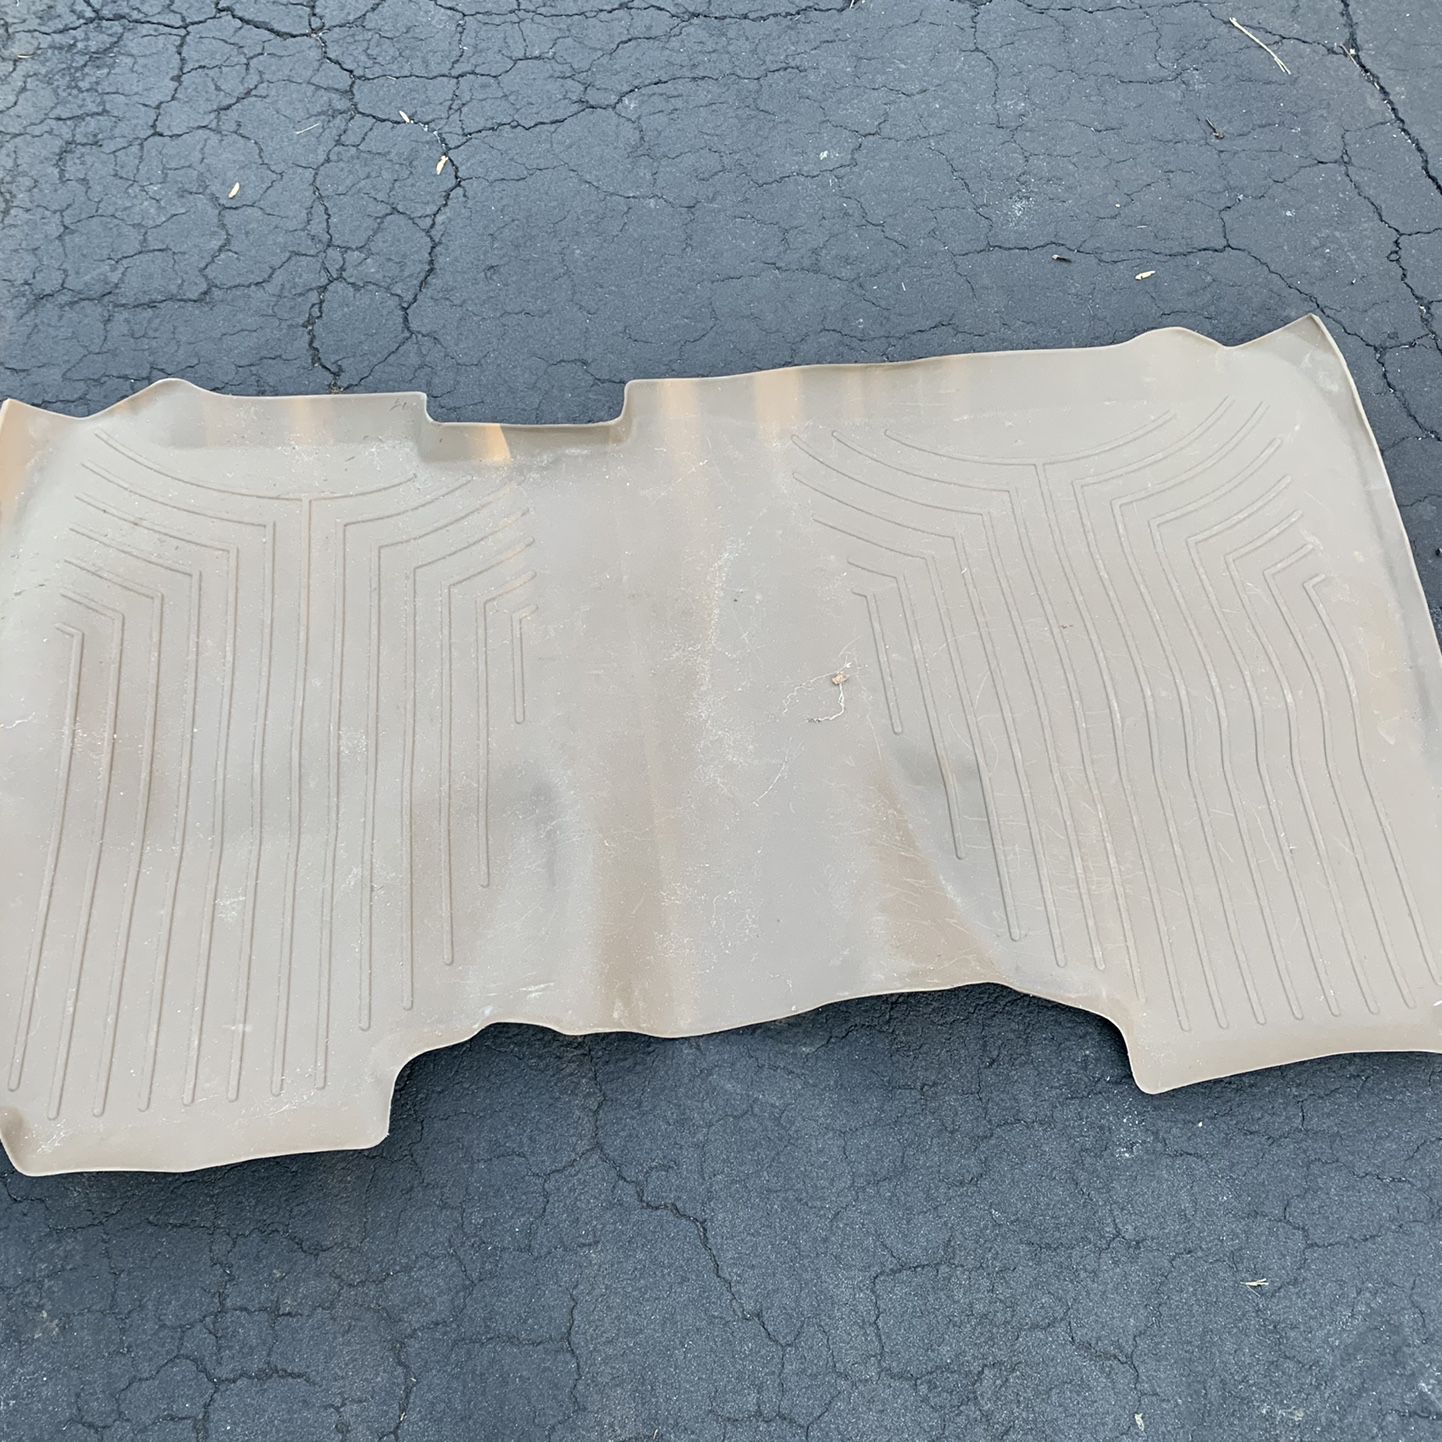 WeatherTech Gray Grey Indoor Shoe Mats 30 x 60 for Sale in Dayton, OH -  OfferUp